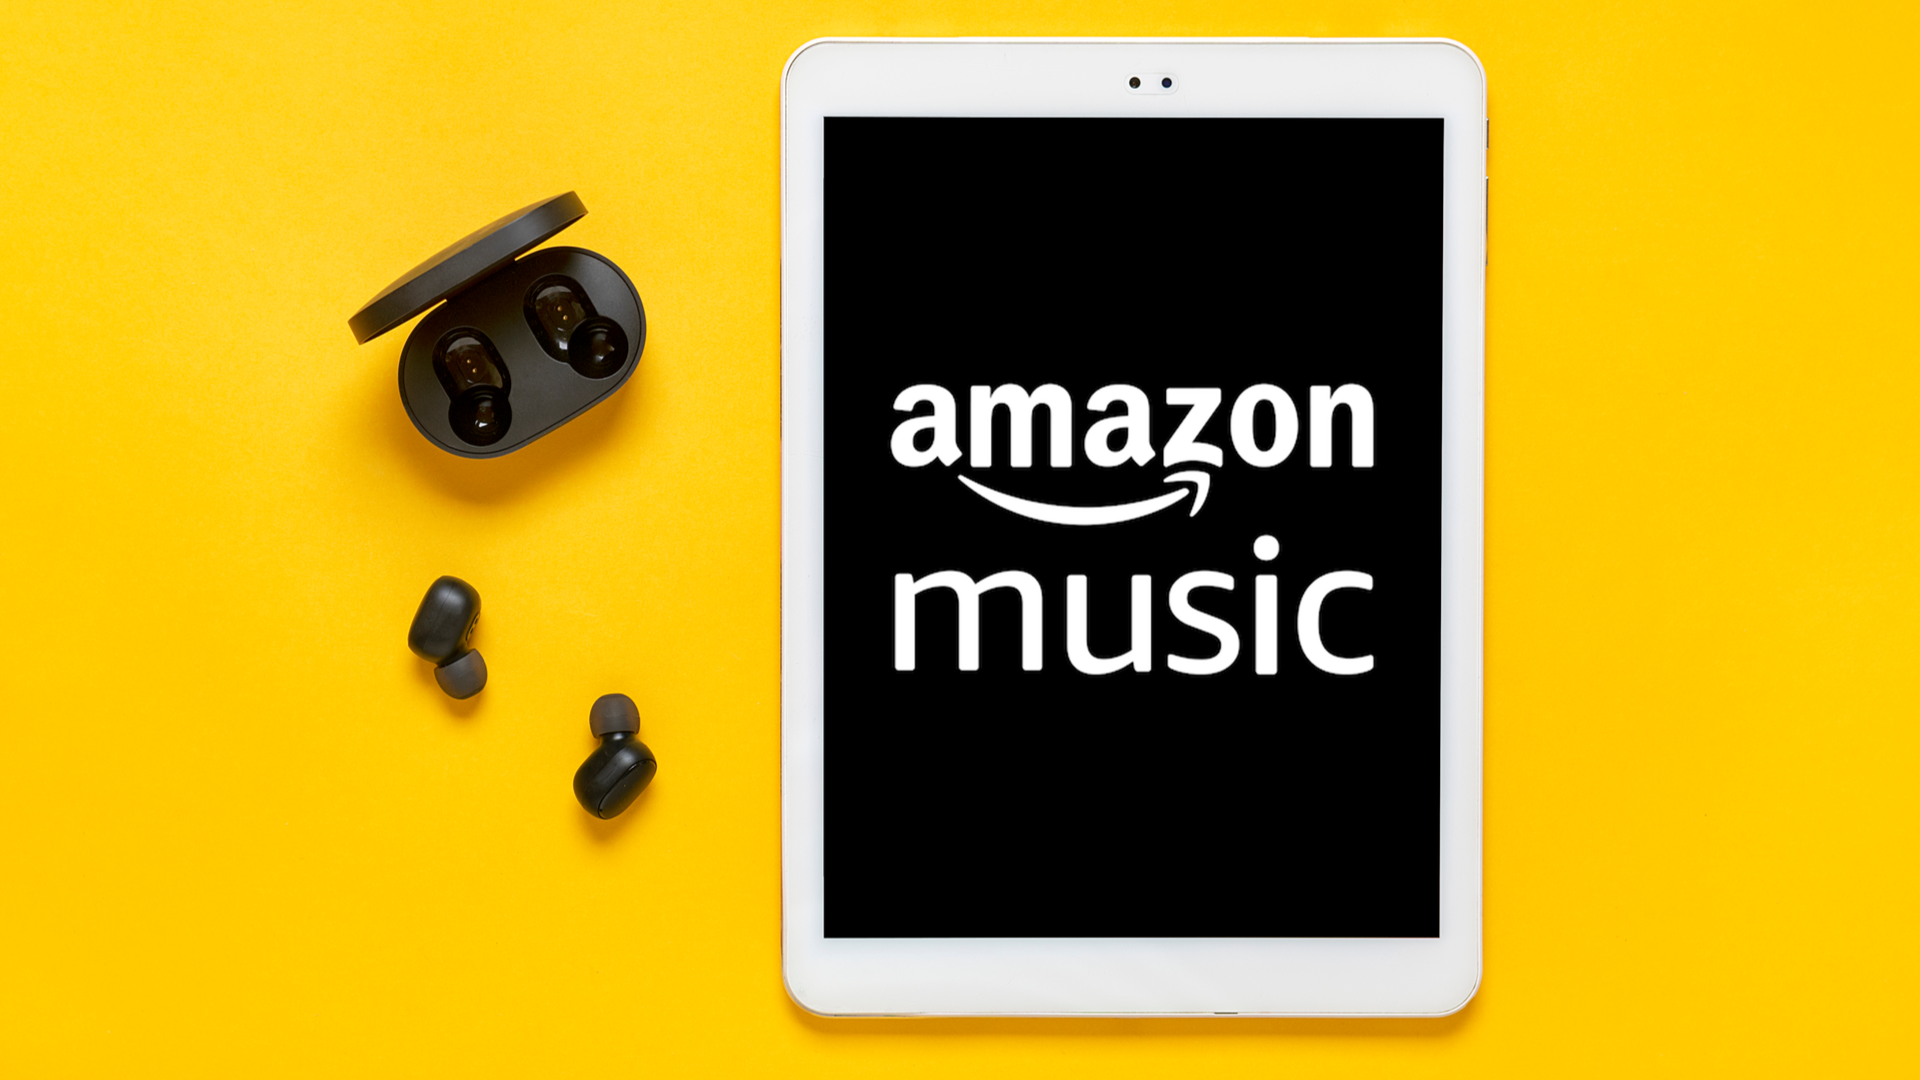 Amazon Challenges Apple by Adding Hi-Fi to Usual Tune Opinion at No Extra Fee